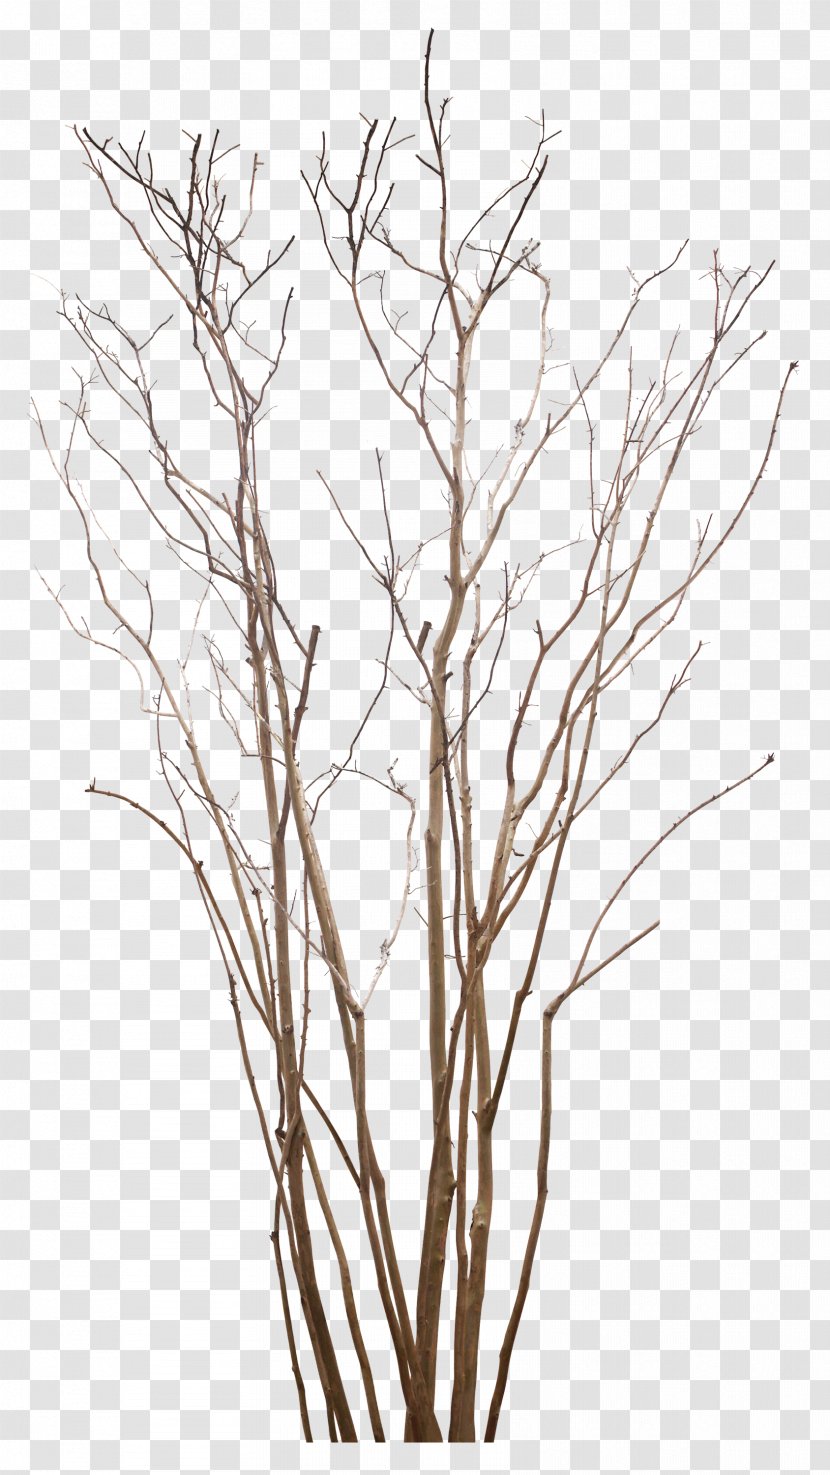 Tree Art Clip - Woody Plant - Branch And Leaves Transparent PNG